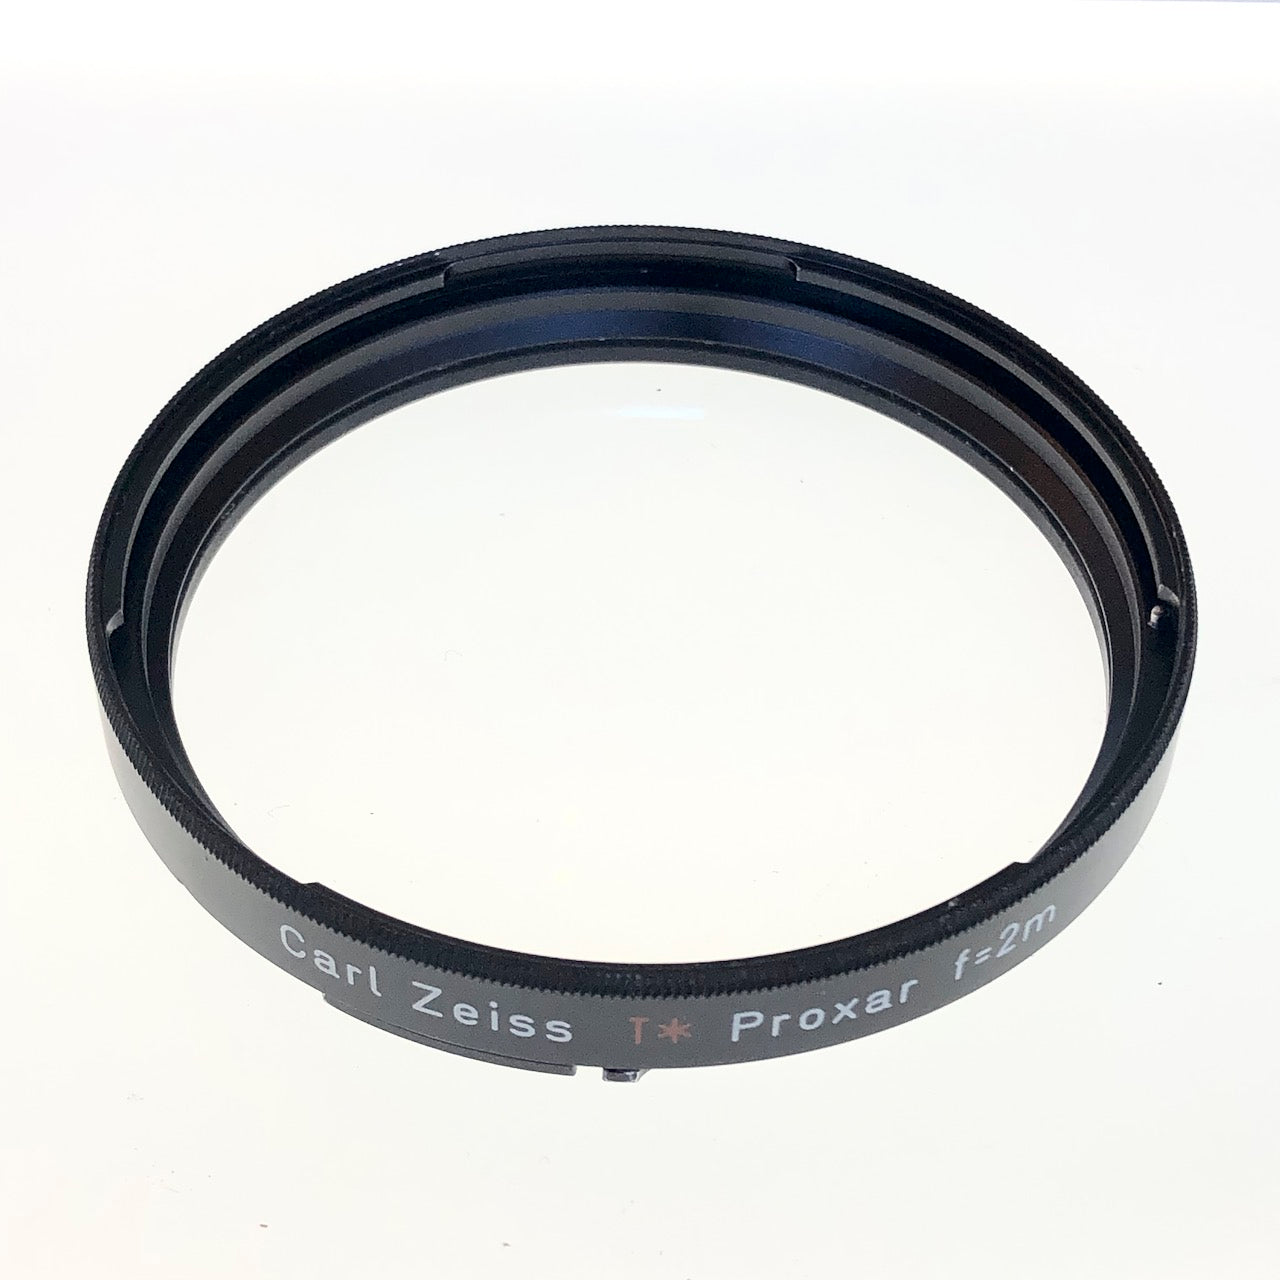 Lens Filters – tagged 